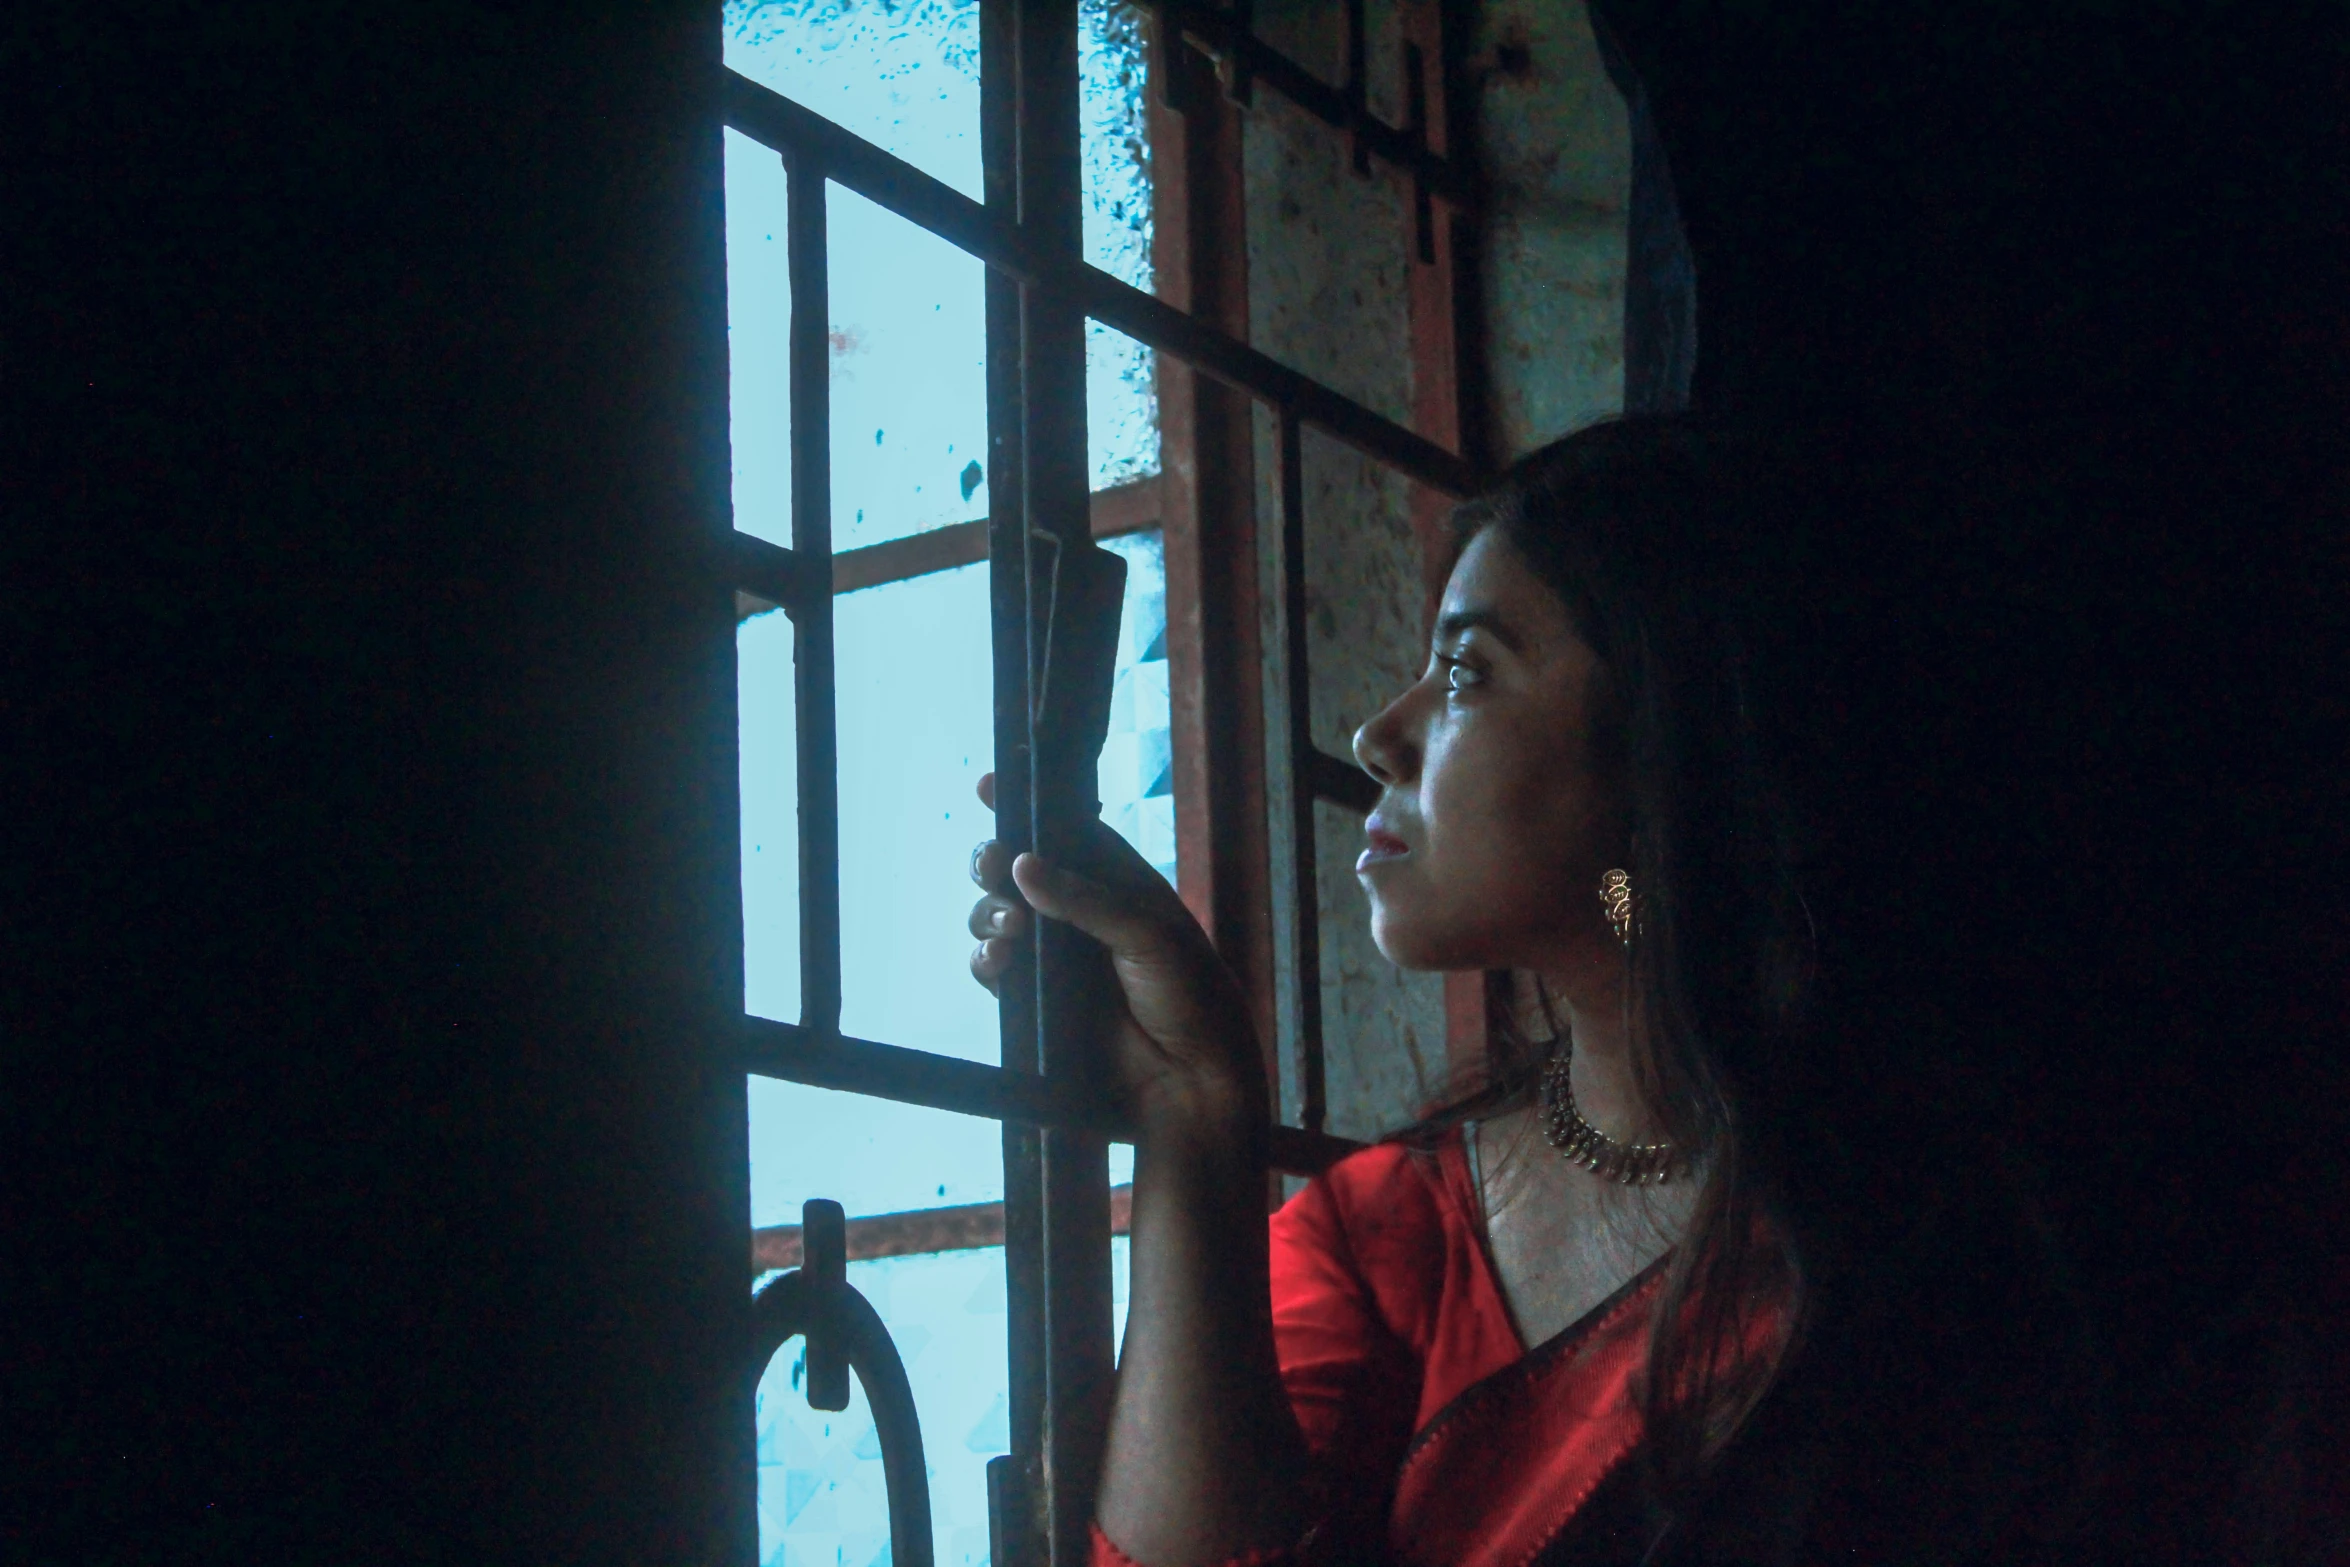 a woman in red standing by a window with black curtain